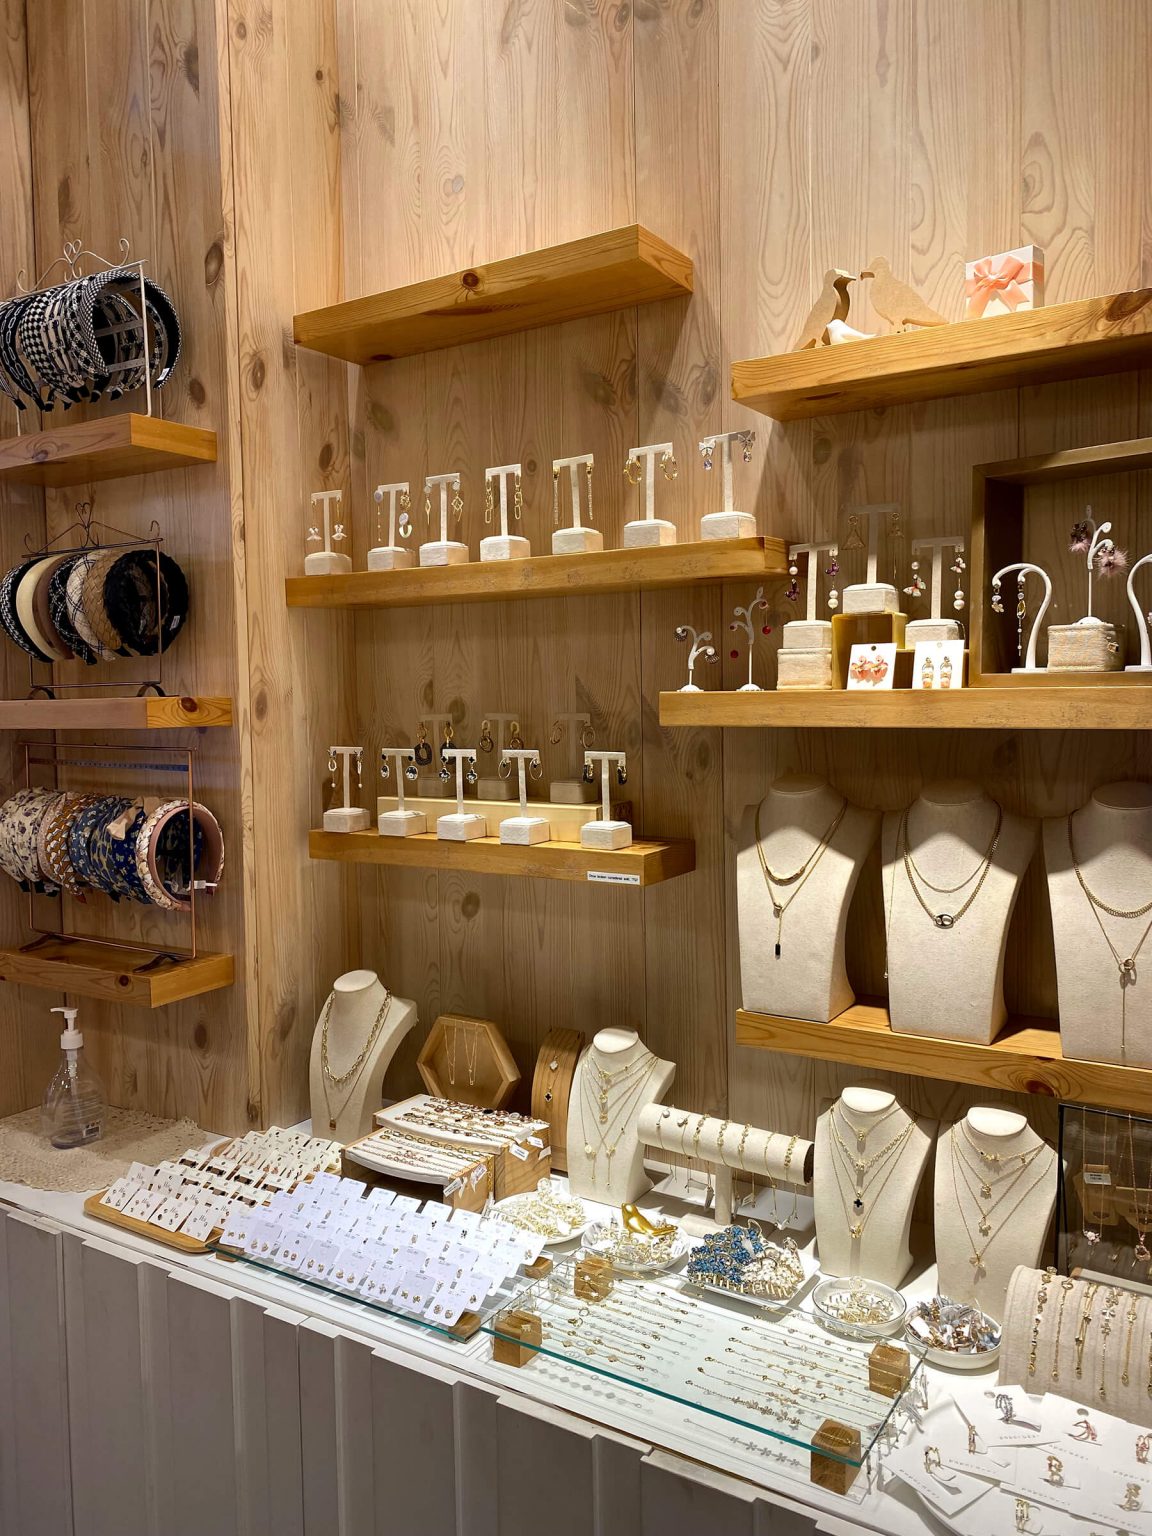 Racks of dainty Korean accessories at Lovely Lil Things.